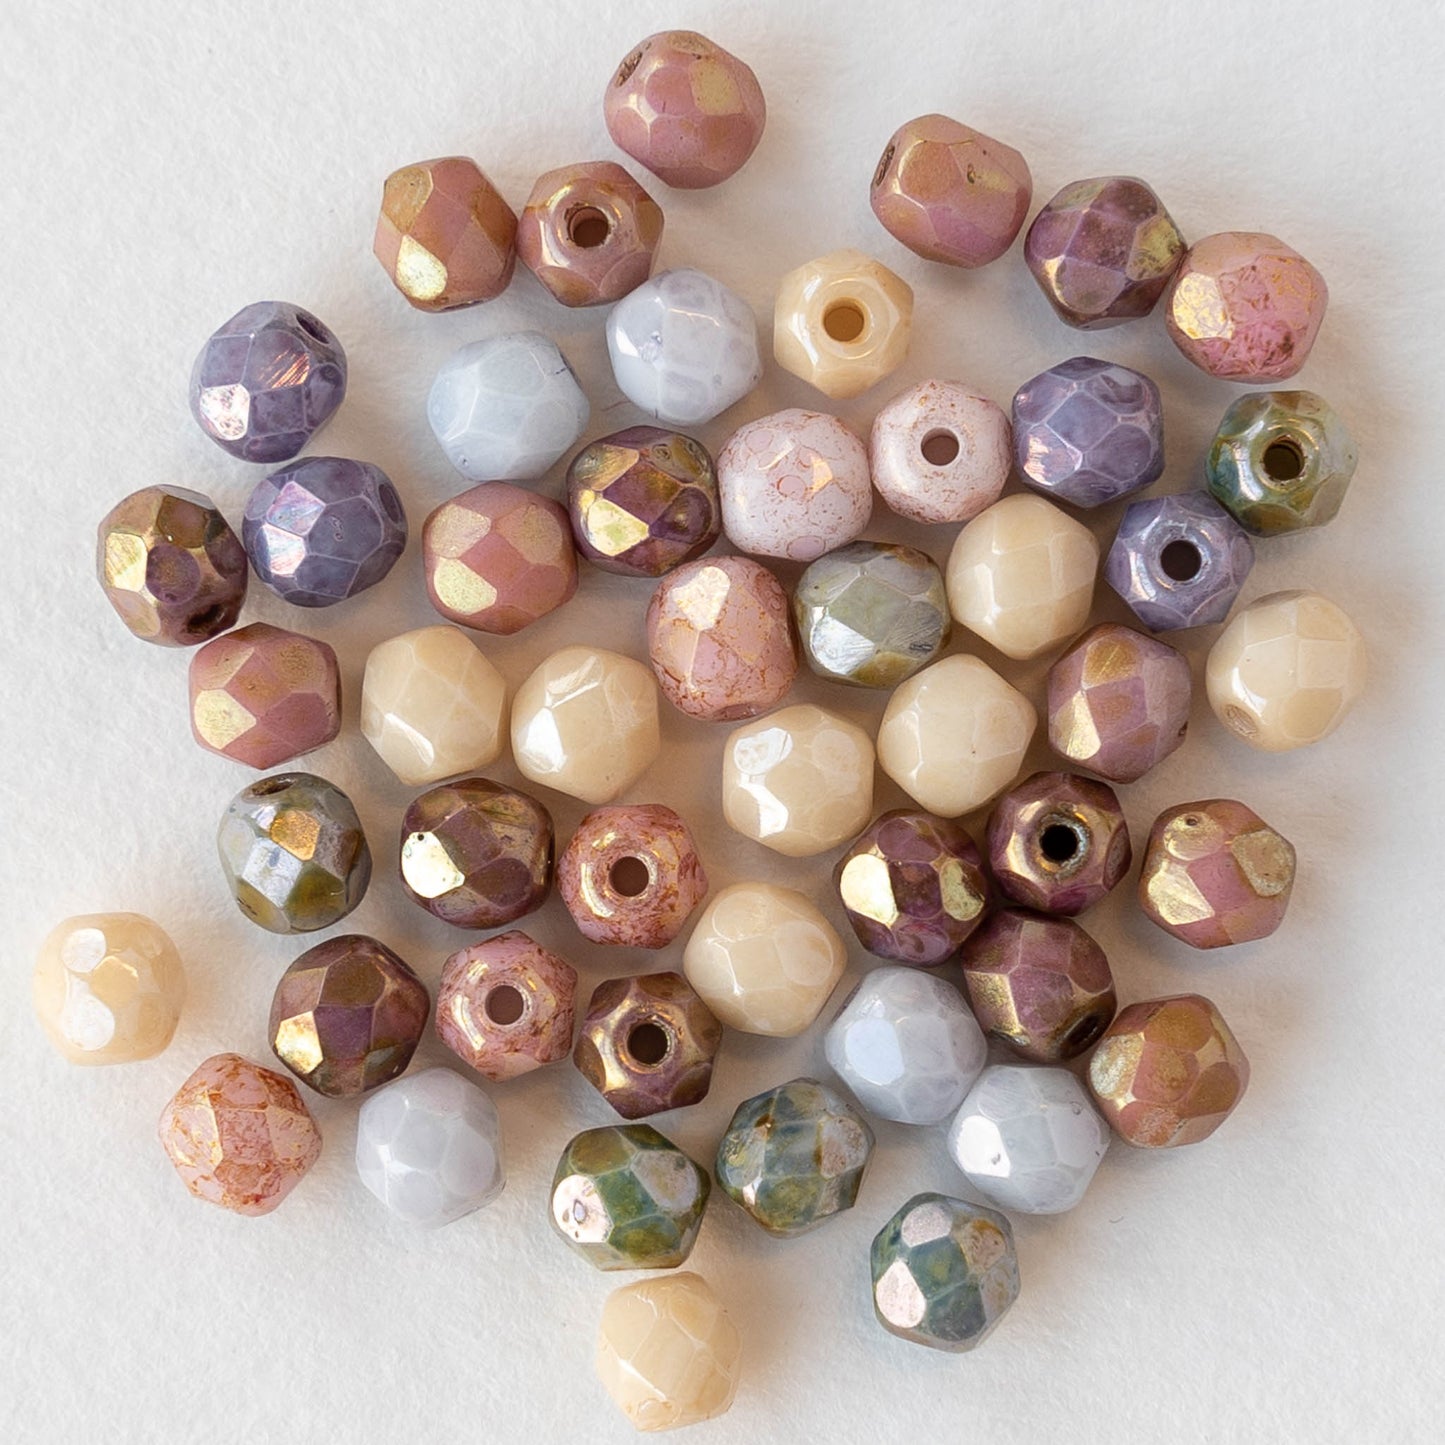 Load image into Gallery viewer, 4mm Round Firepolished Beads - Opaque Lustered Picasso Mix - 50 beads
